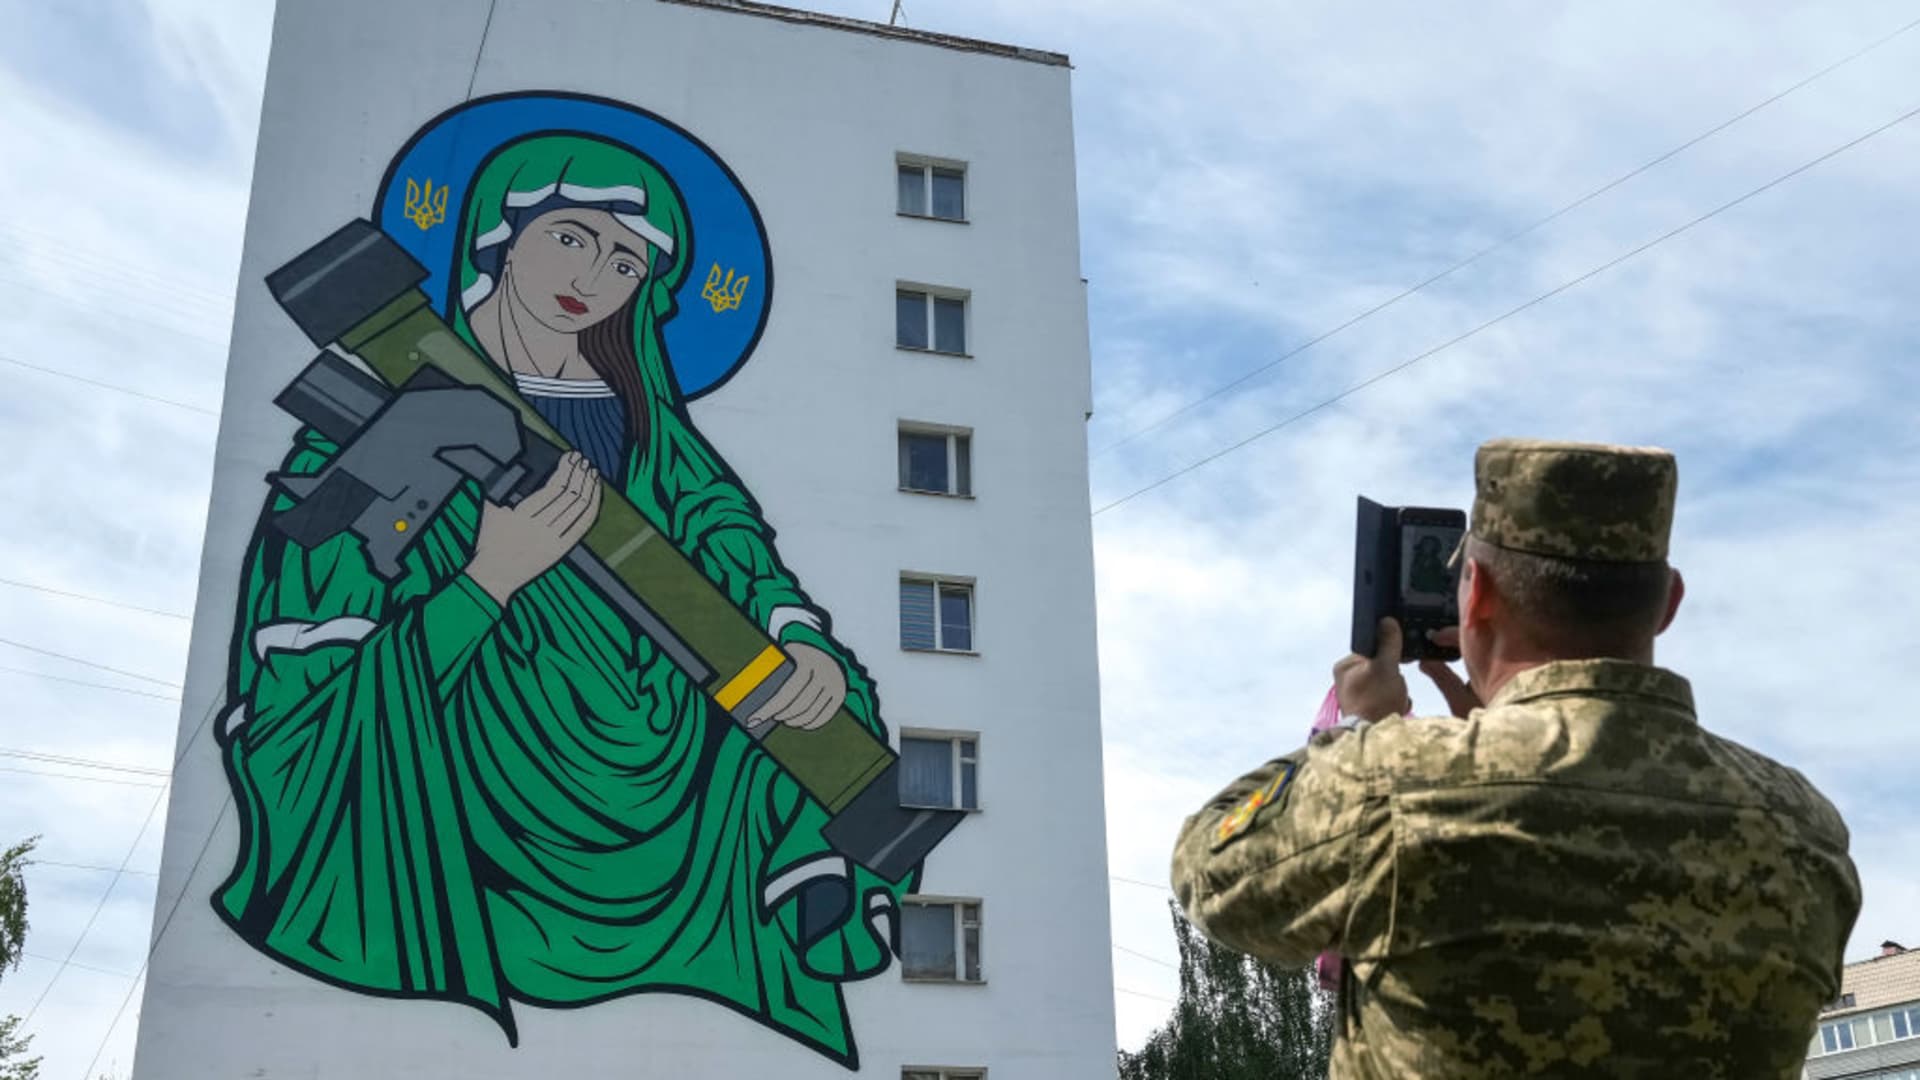 Ukrainian soldiers take pictures of a mural titled 'Saint Javelin' dedicated to the U.S.-made portable surface-to-air missile has been unveiled on the side of a Kyiv apartment block on May 25, 2022 in Kyiv, Ukraine. The artwork by illustrator and artist Chris Shaw is in reference to the Javelin missile donated to Ukrainian troops to battle against the Russian invasion.